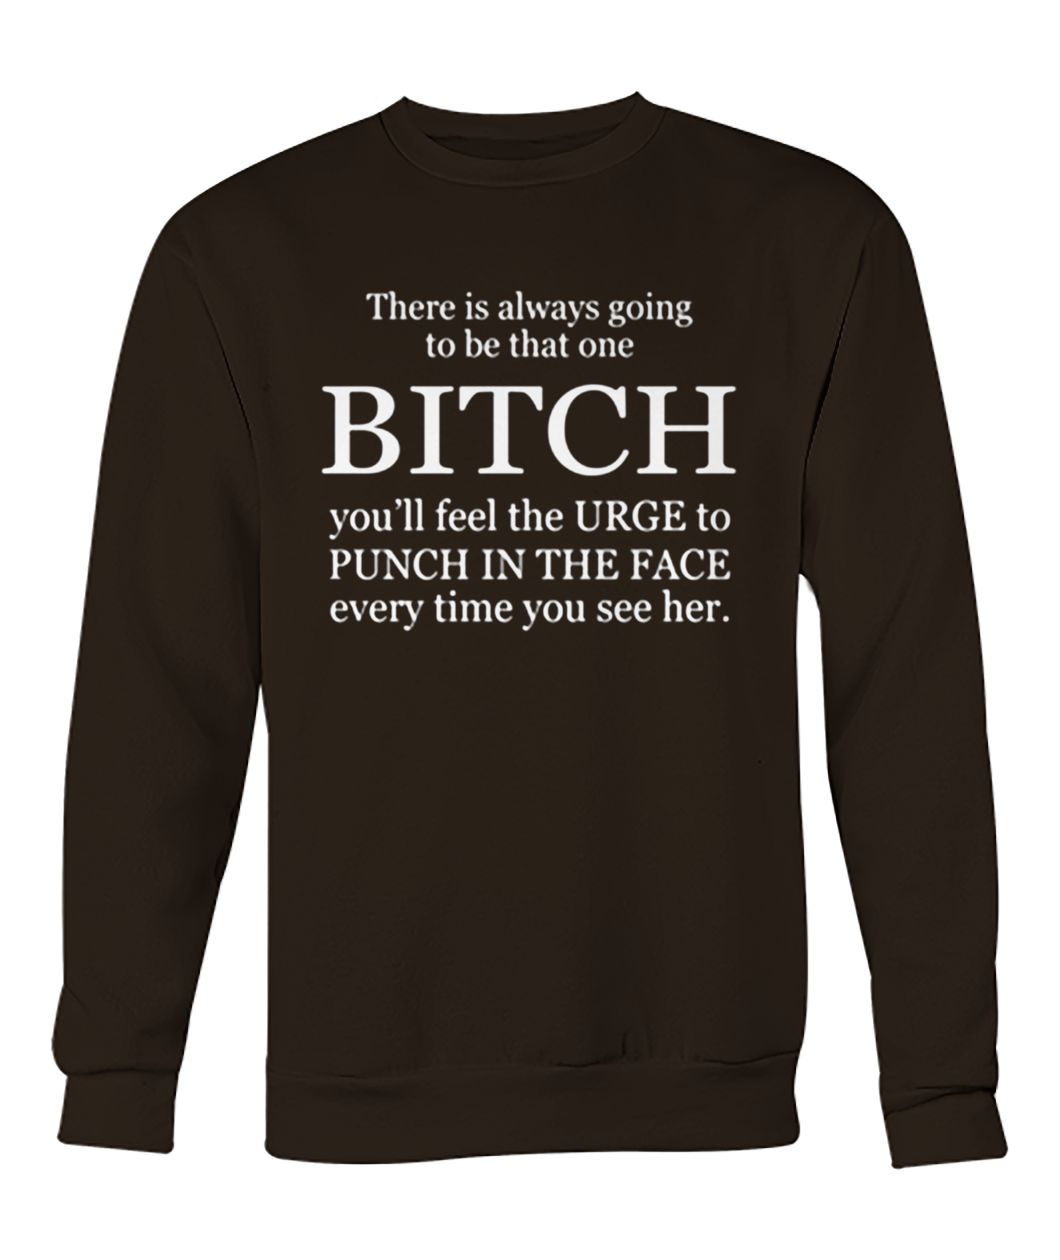 There is always going to be that one bitch you'll feel the urge crew neck sweatshirt